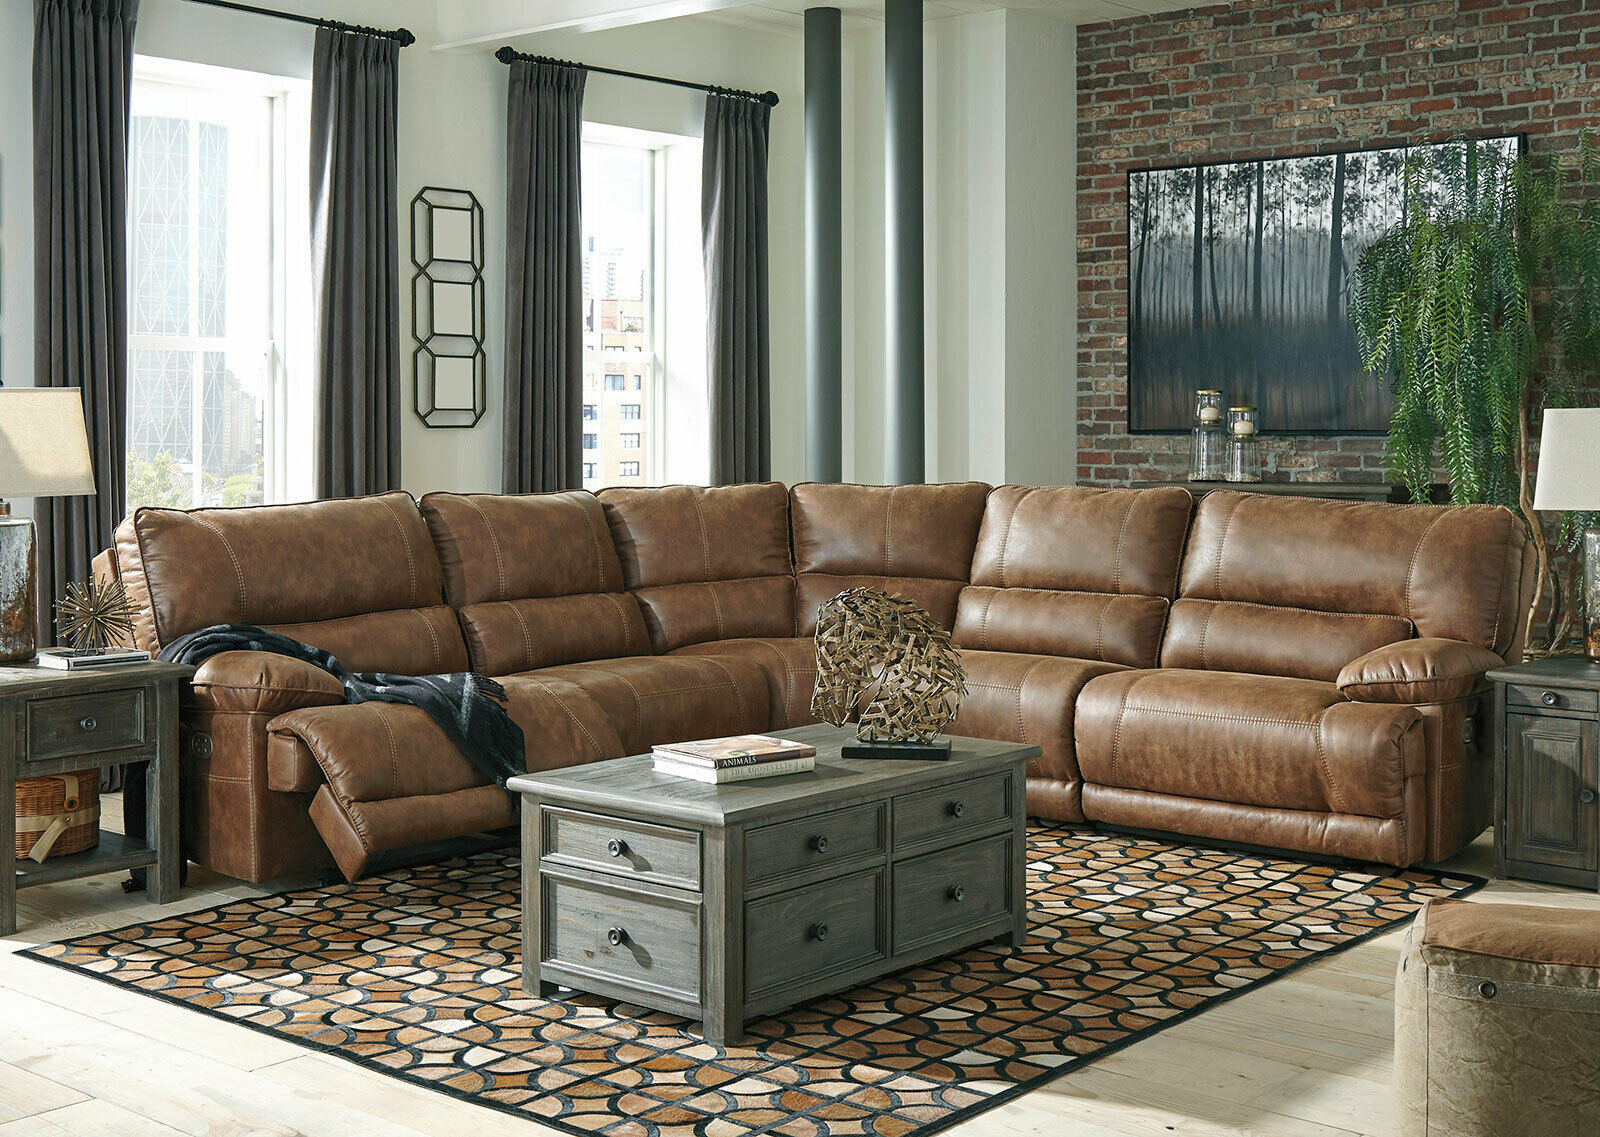 HAMBURG 5pcs Sectional Living Room Brown Faux Leather Power Reclining